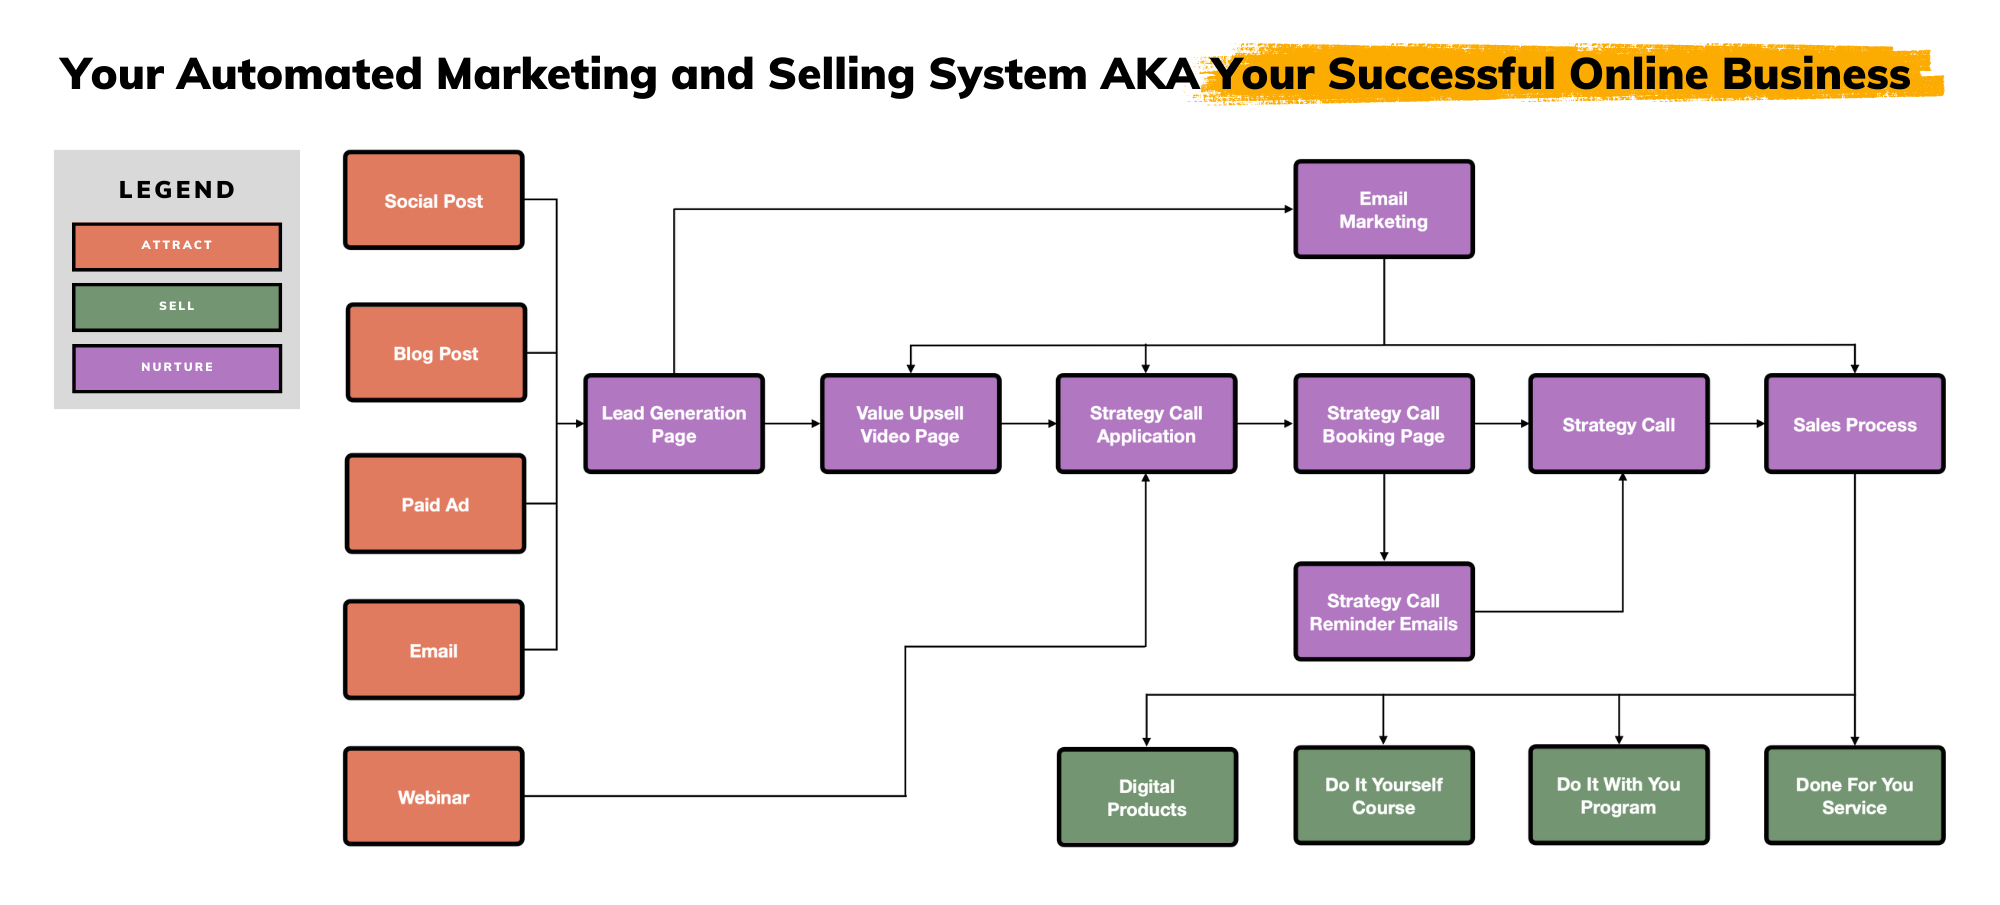 ASN - Automated Marketing and Selling System